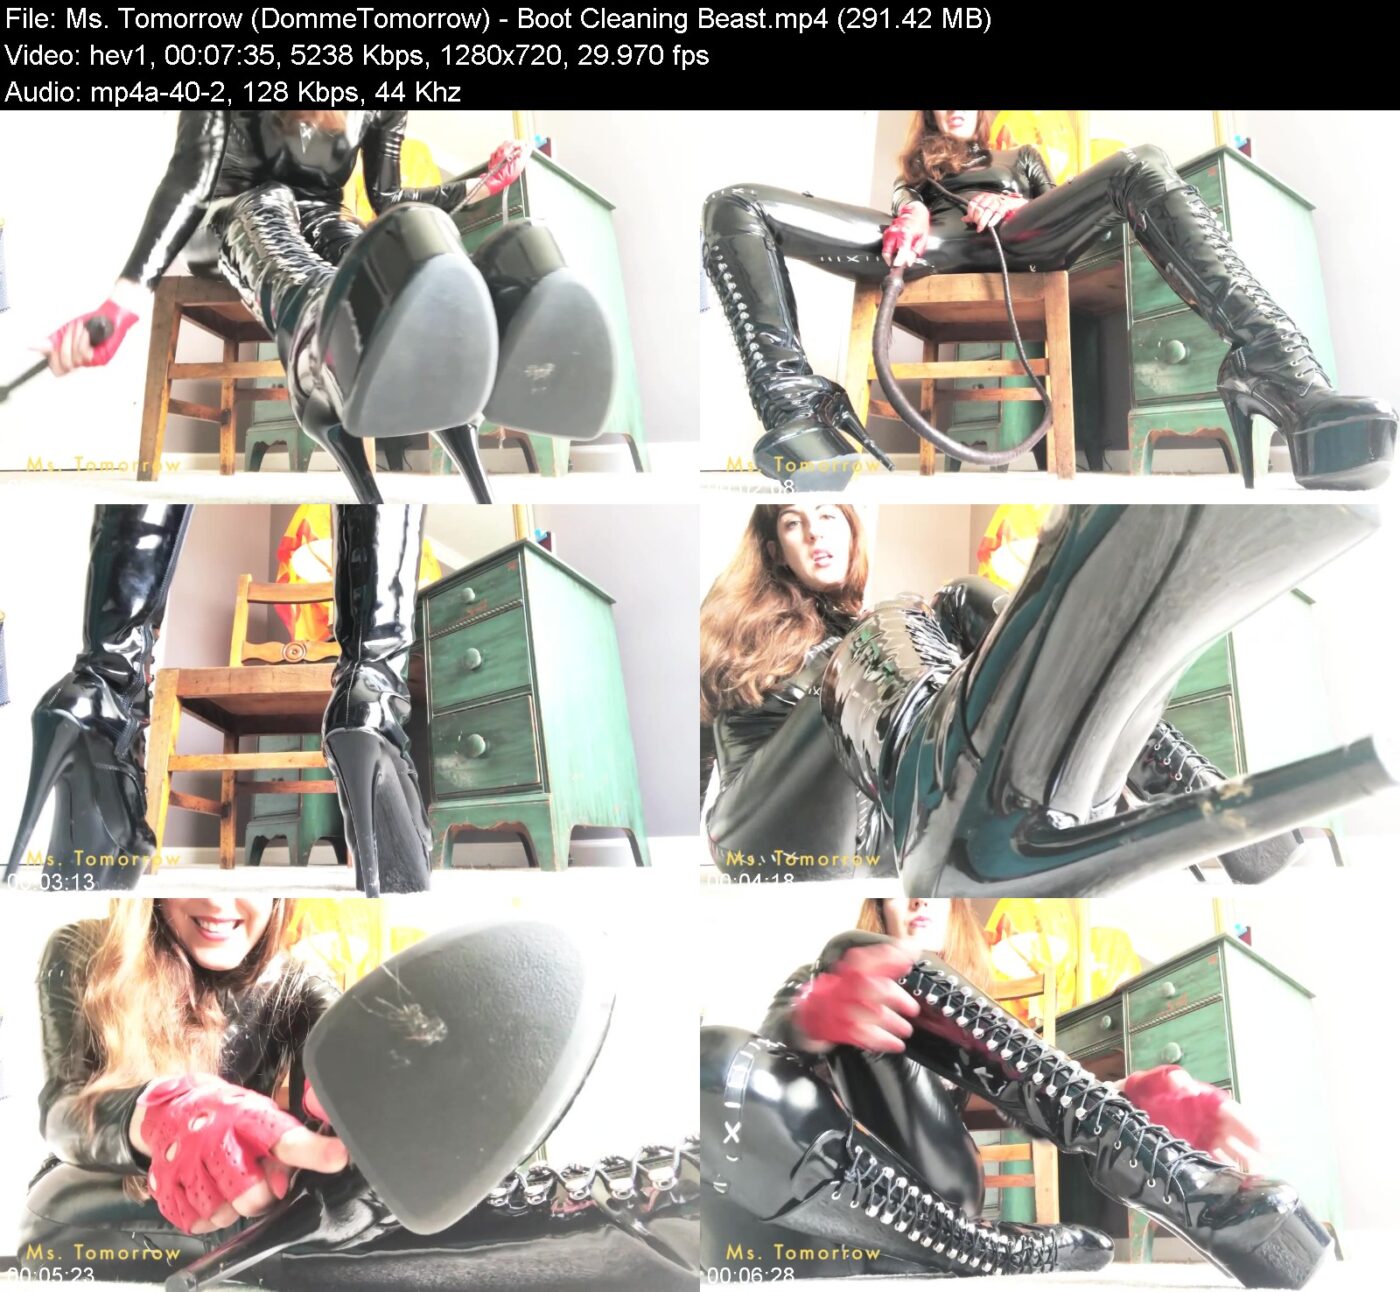 Actress: Ms. Tomorrow (DommeTomorrow). Title and Studio: Boot Cleaning Beast